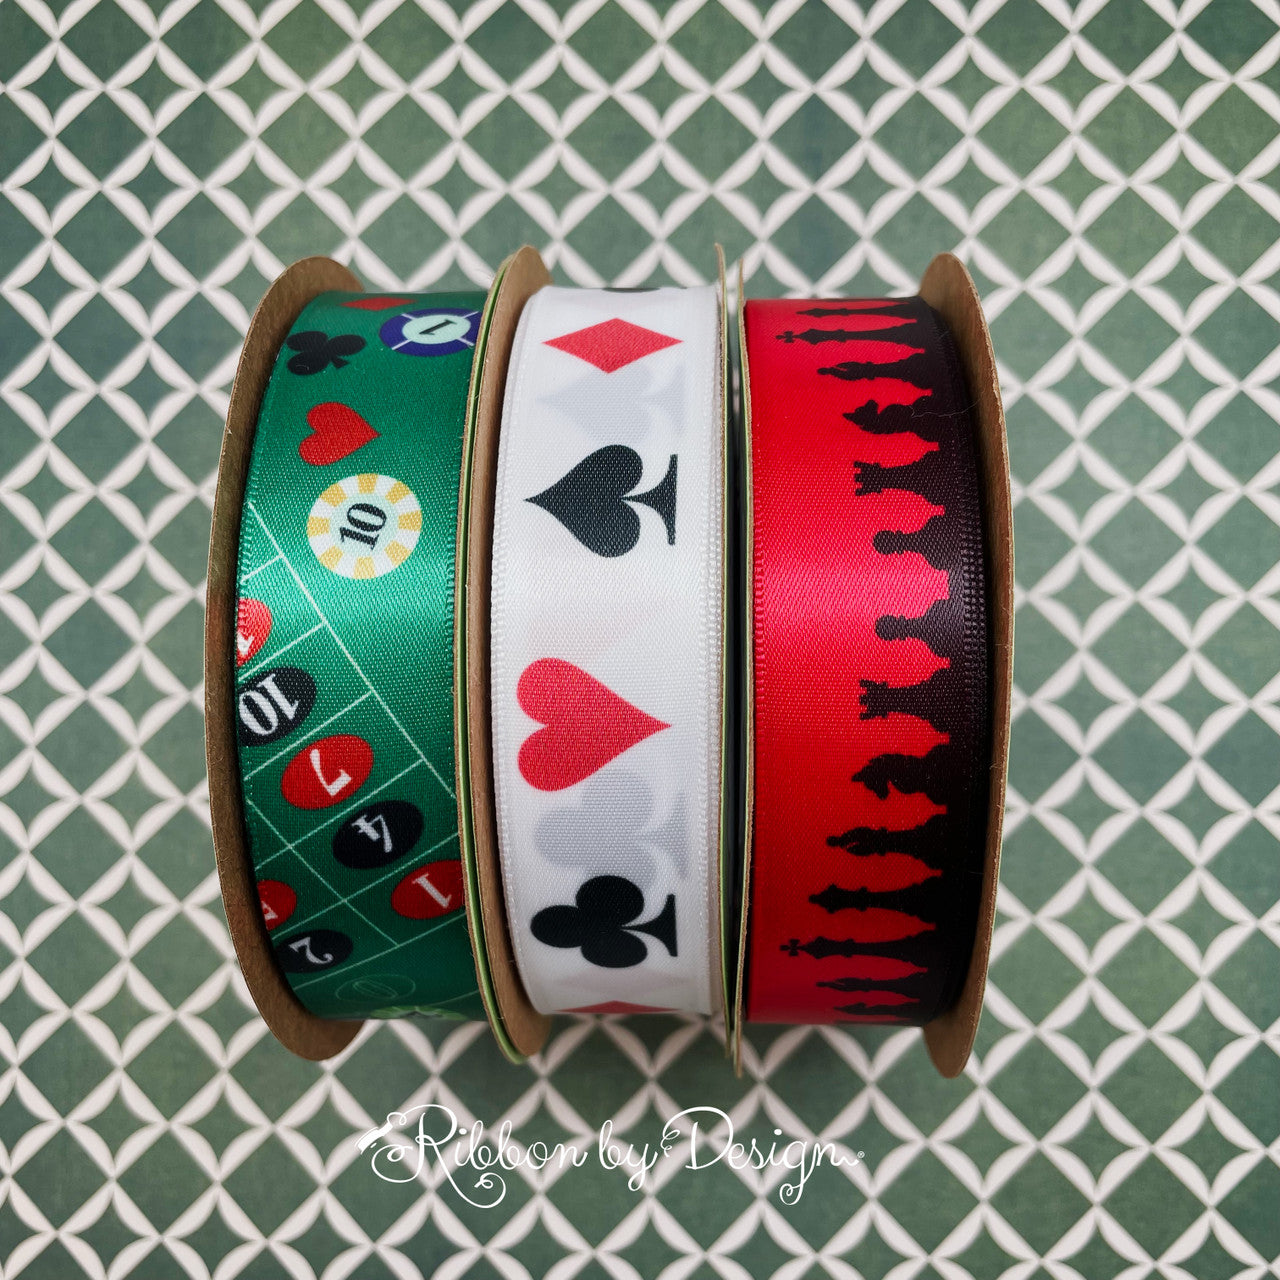 Our gaming themed trio features casino, cards and chess game piece ribbons. There is something for everyone!